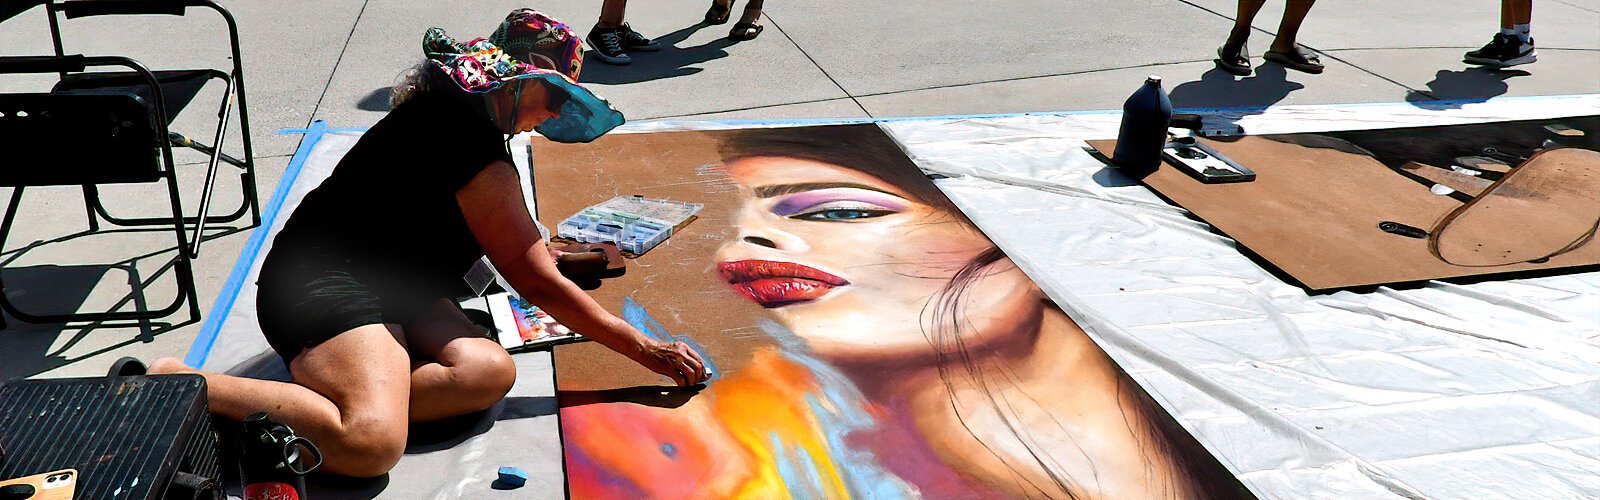 Ellenton-based painter, muralist and chalk artist Hilary Frambes says creating a chalk drawing live is like performance art, connecting directly with the viewers right in the moment.